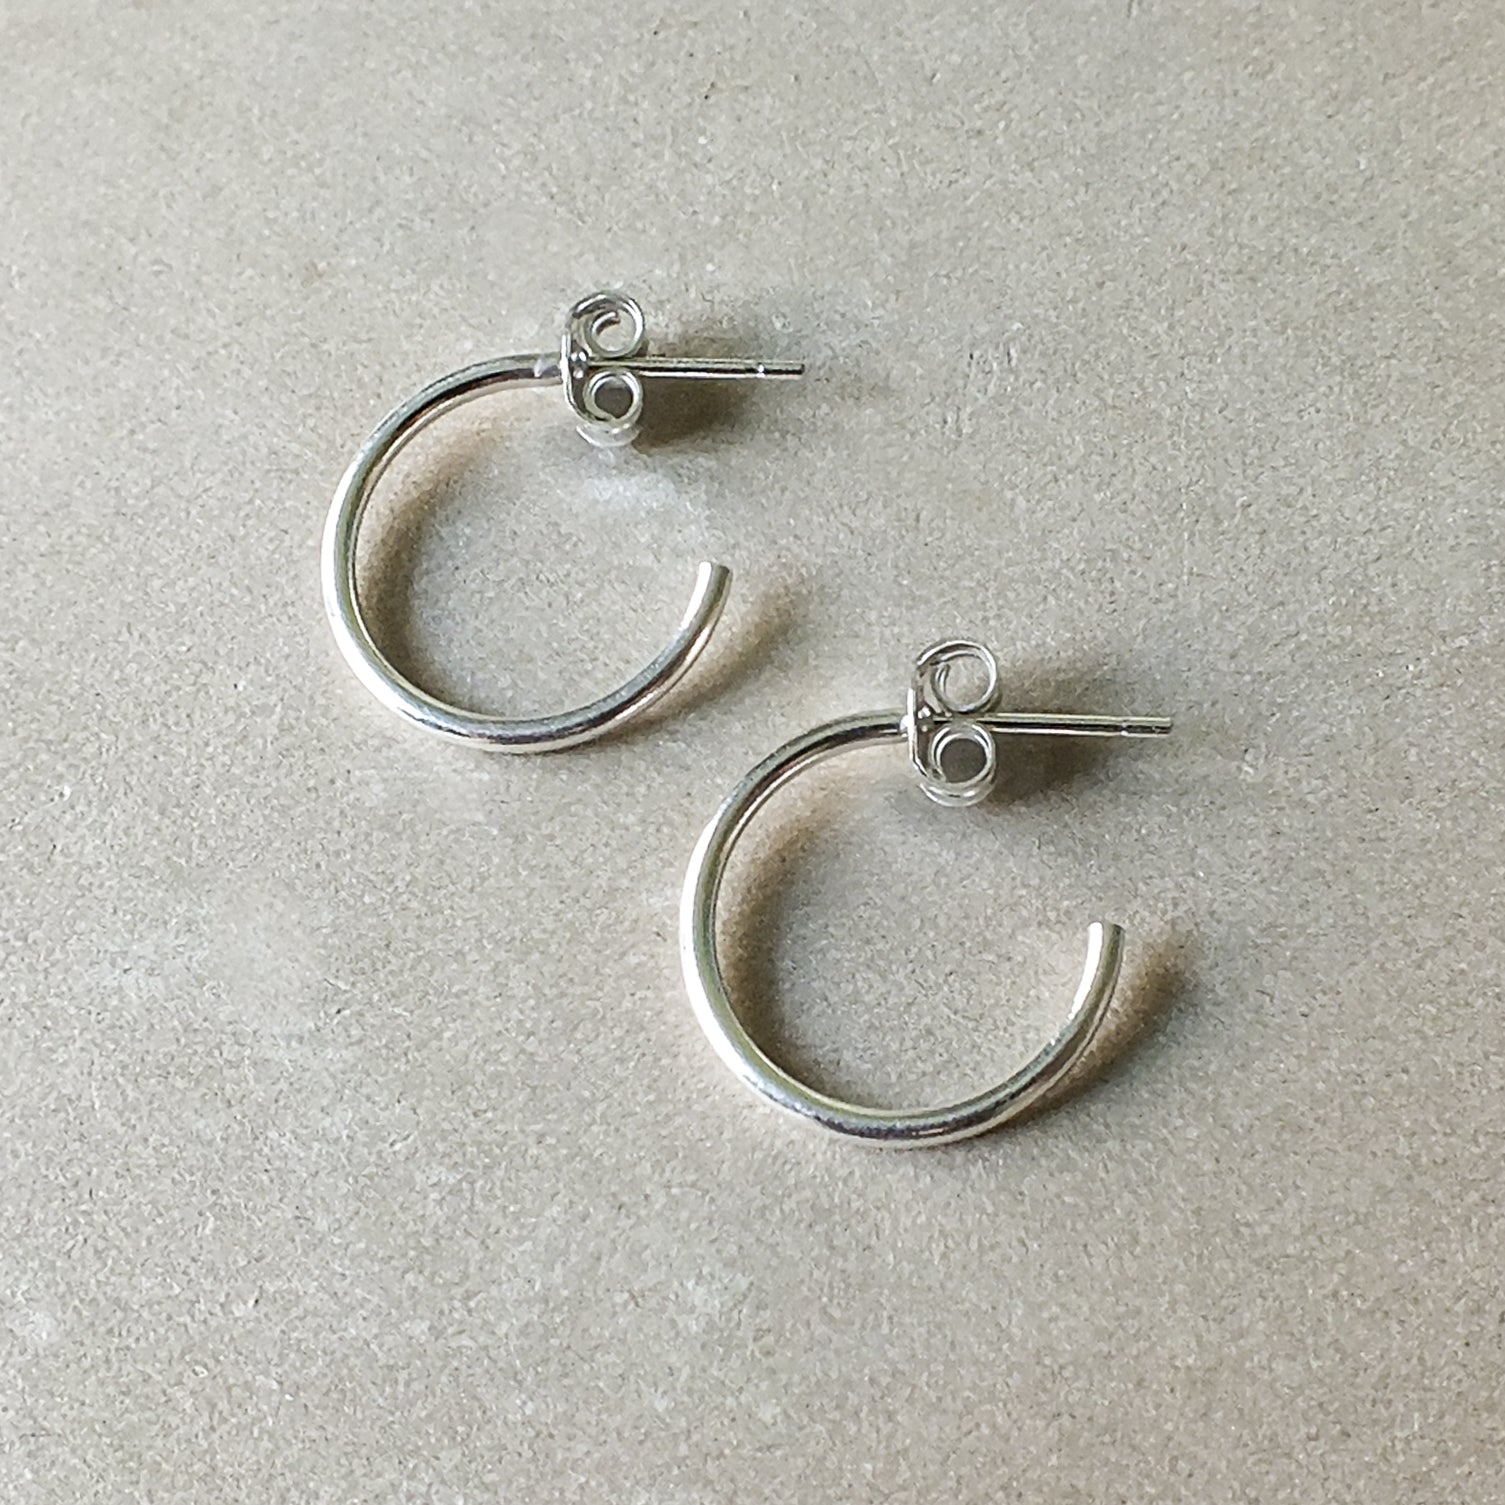 Open hoop earrings, medium from Becoming Jewelry on a light grey surface.